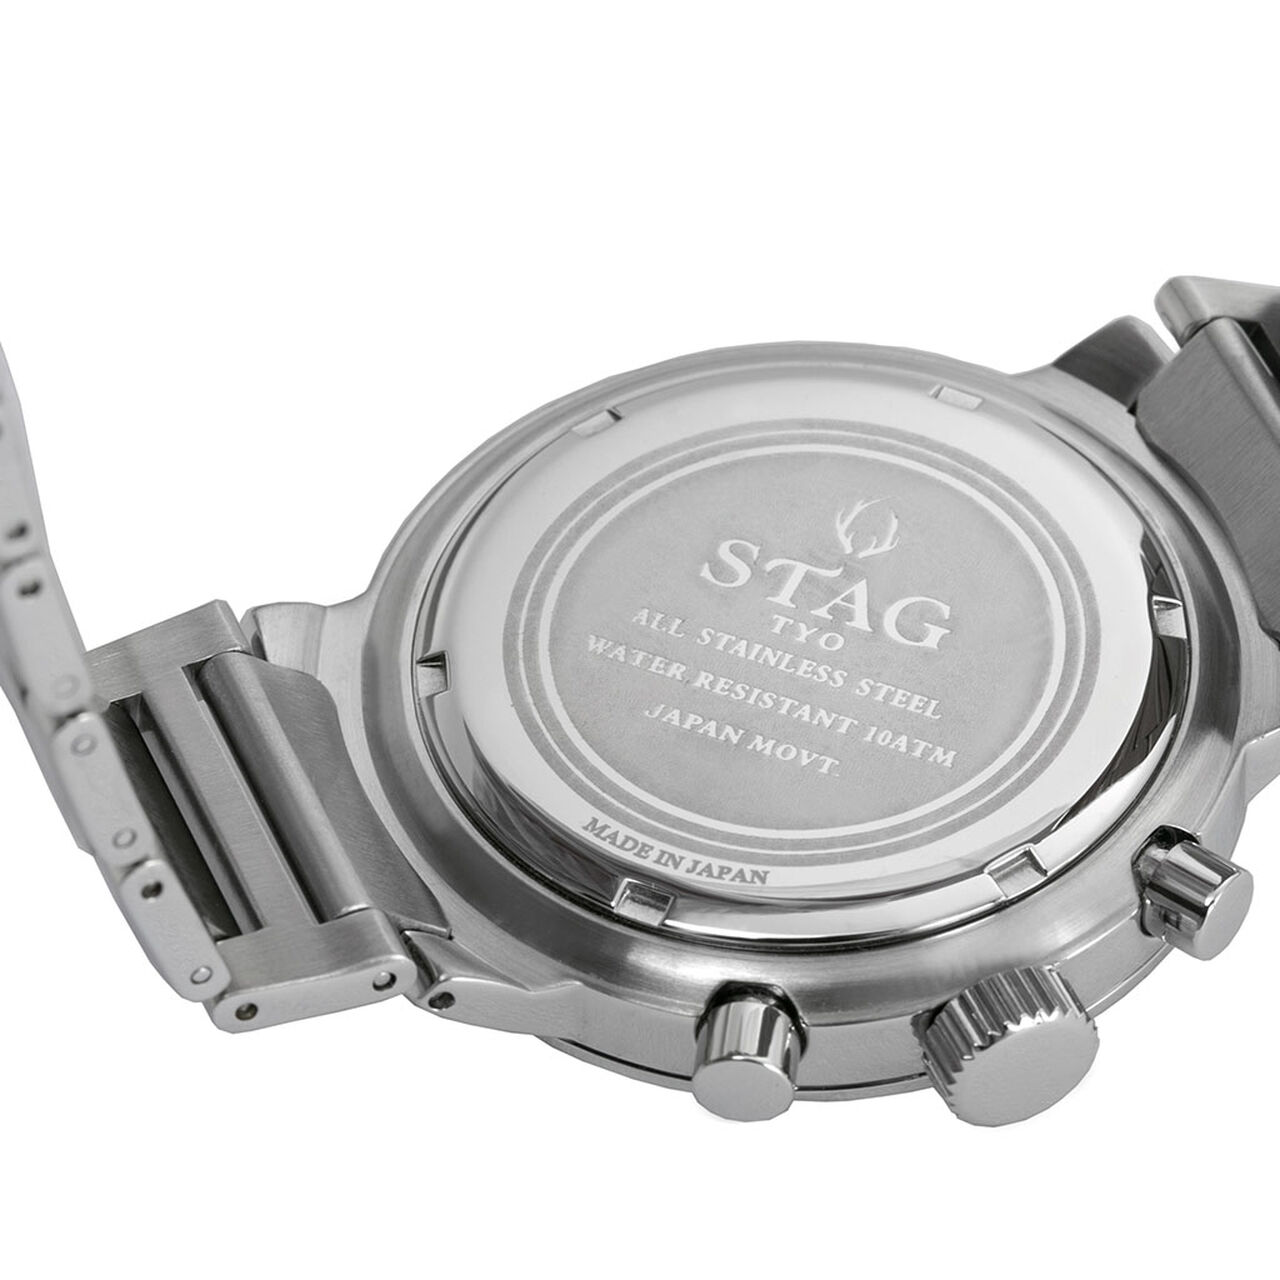 STAG TYO Chronograph,, large image number 4